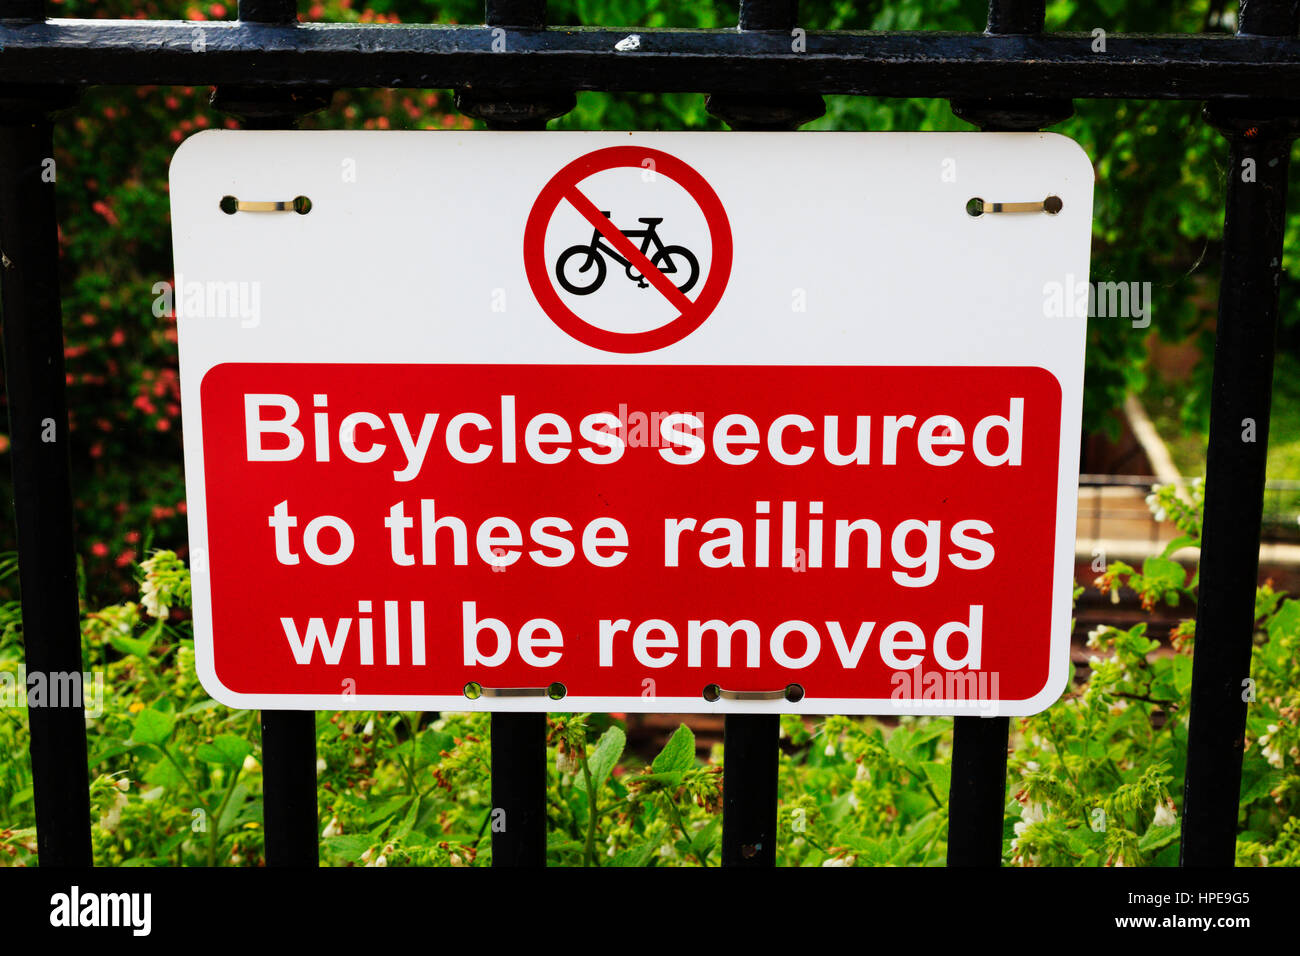 Sign warning that bicycles secured to these railing will be removed on a fence railing. UK Stock Photo